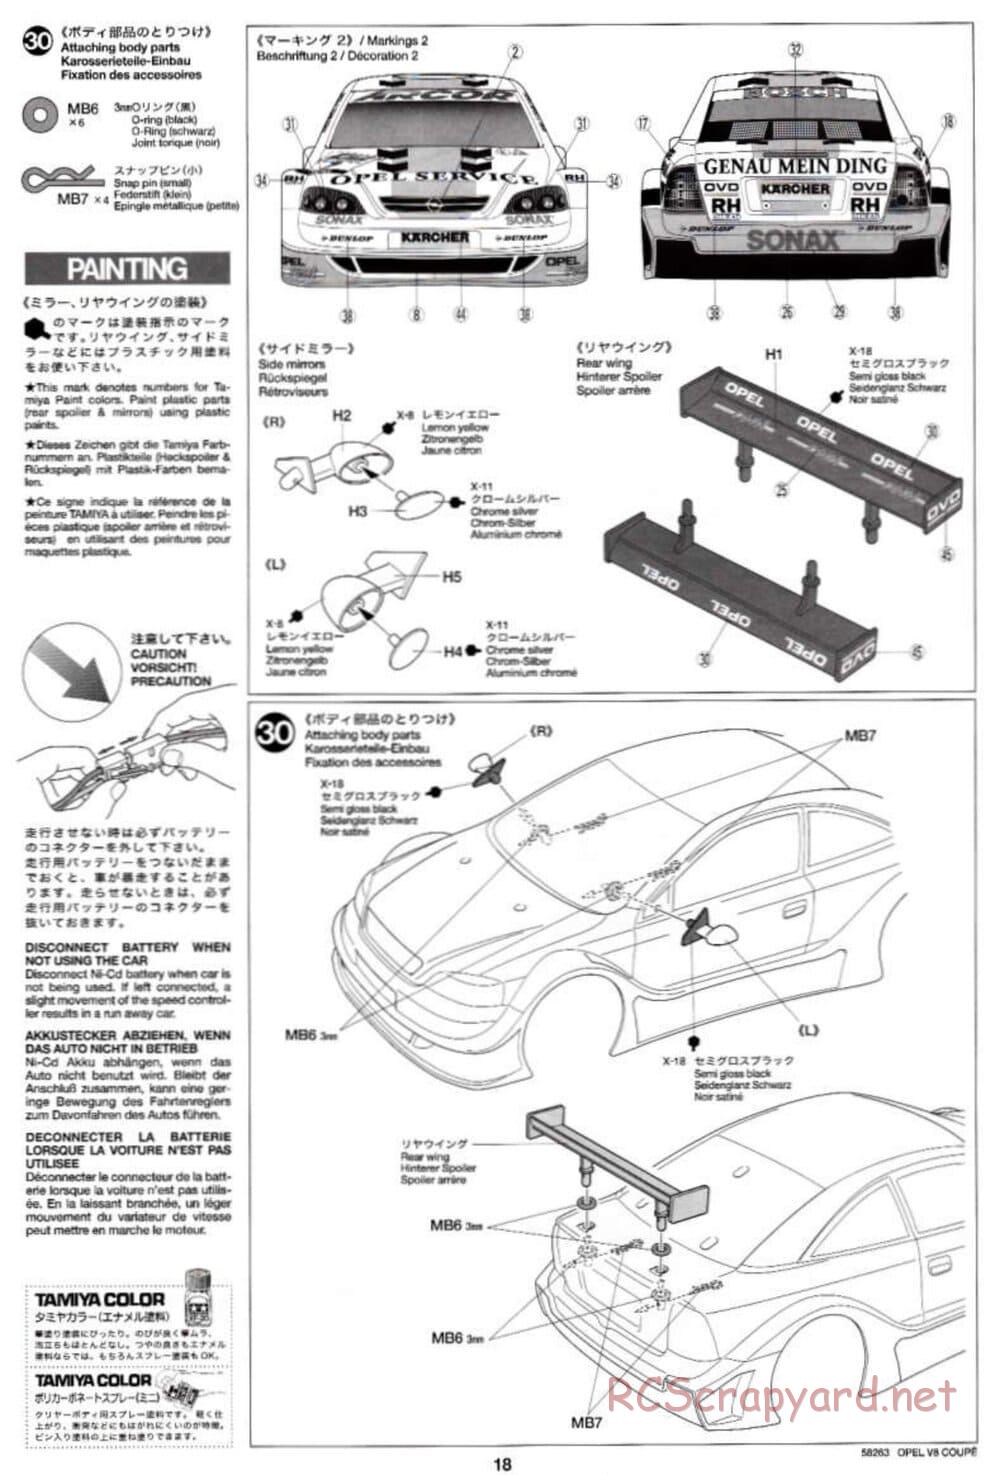 Tamiya - Opel V8 Coupe - TL-01 Chassis - Manual - Page 18